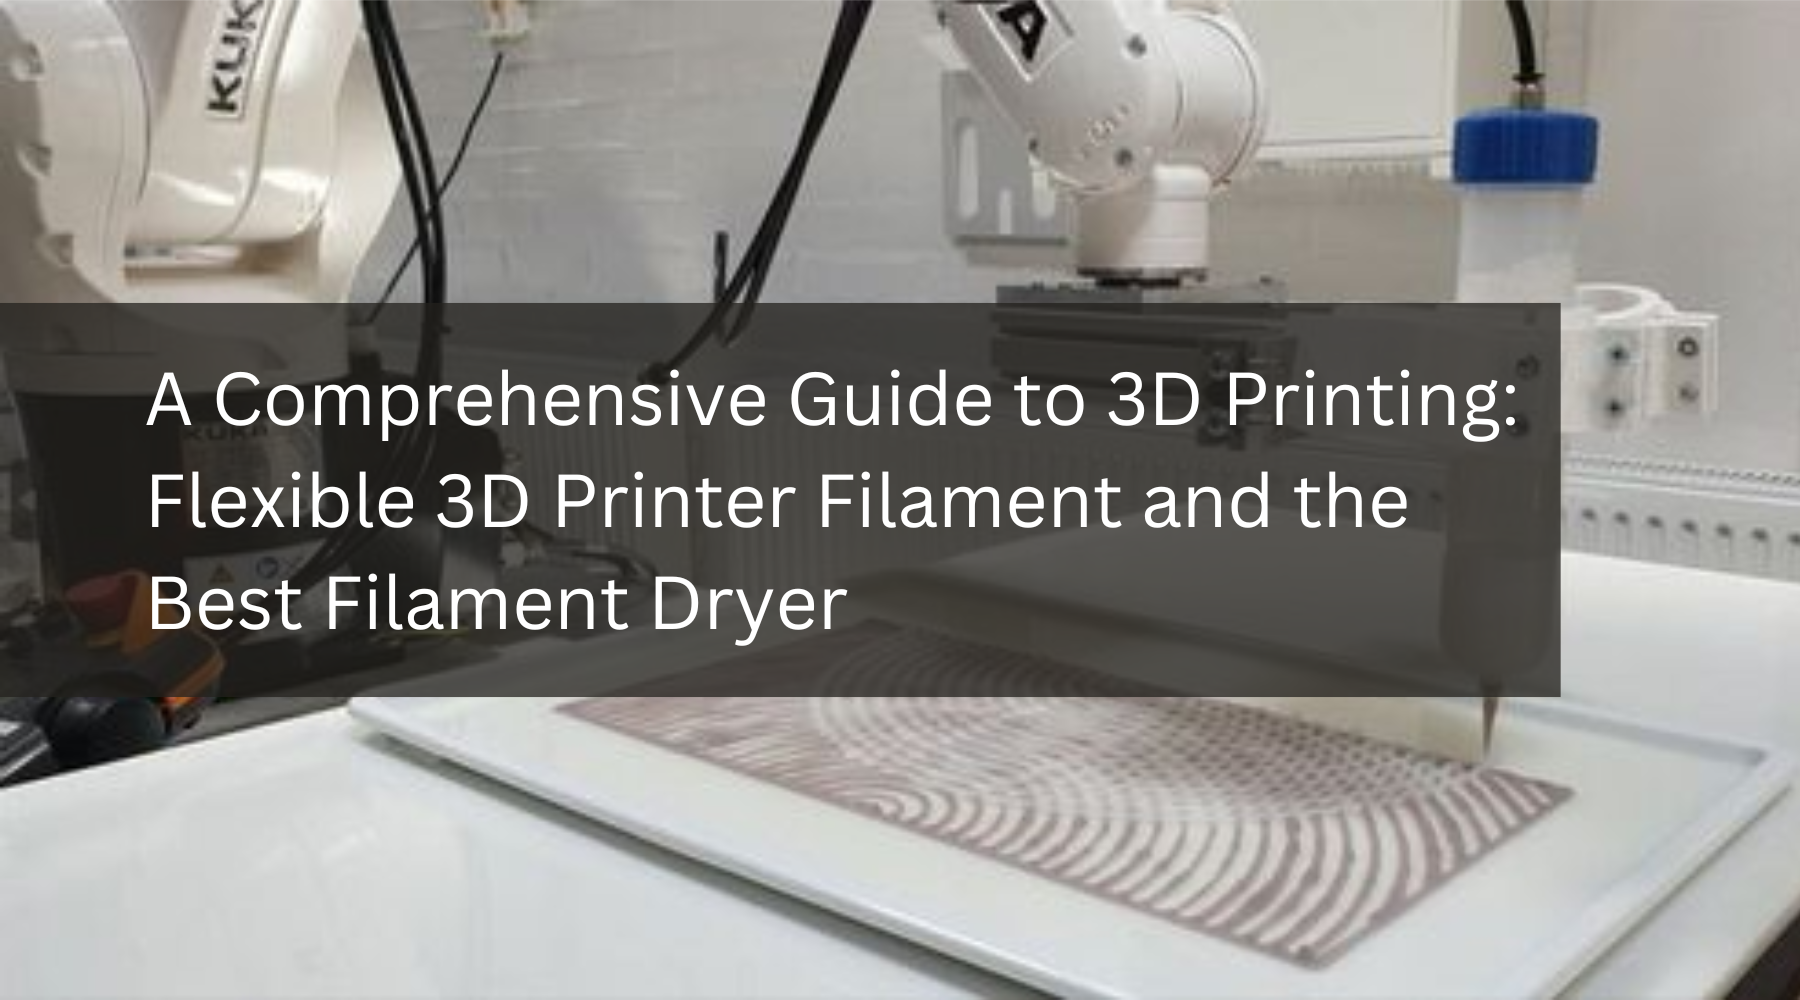 A Comprehensive Guide to 3D Printing: Flexible 3D Printer Filament and the Best Filament Dryer